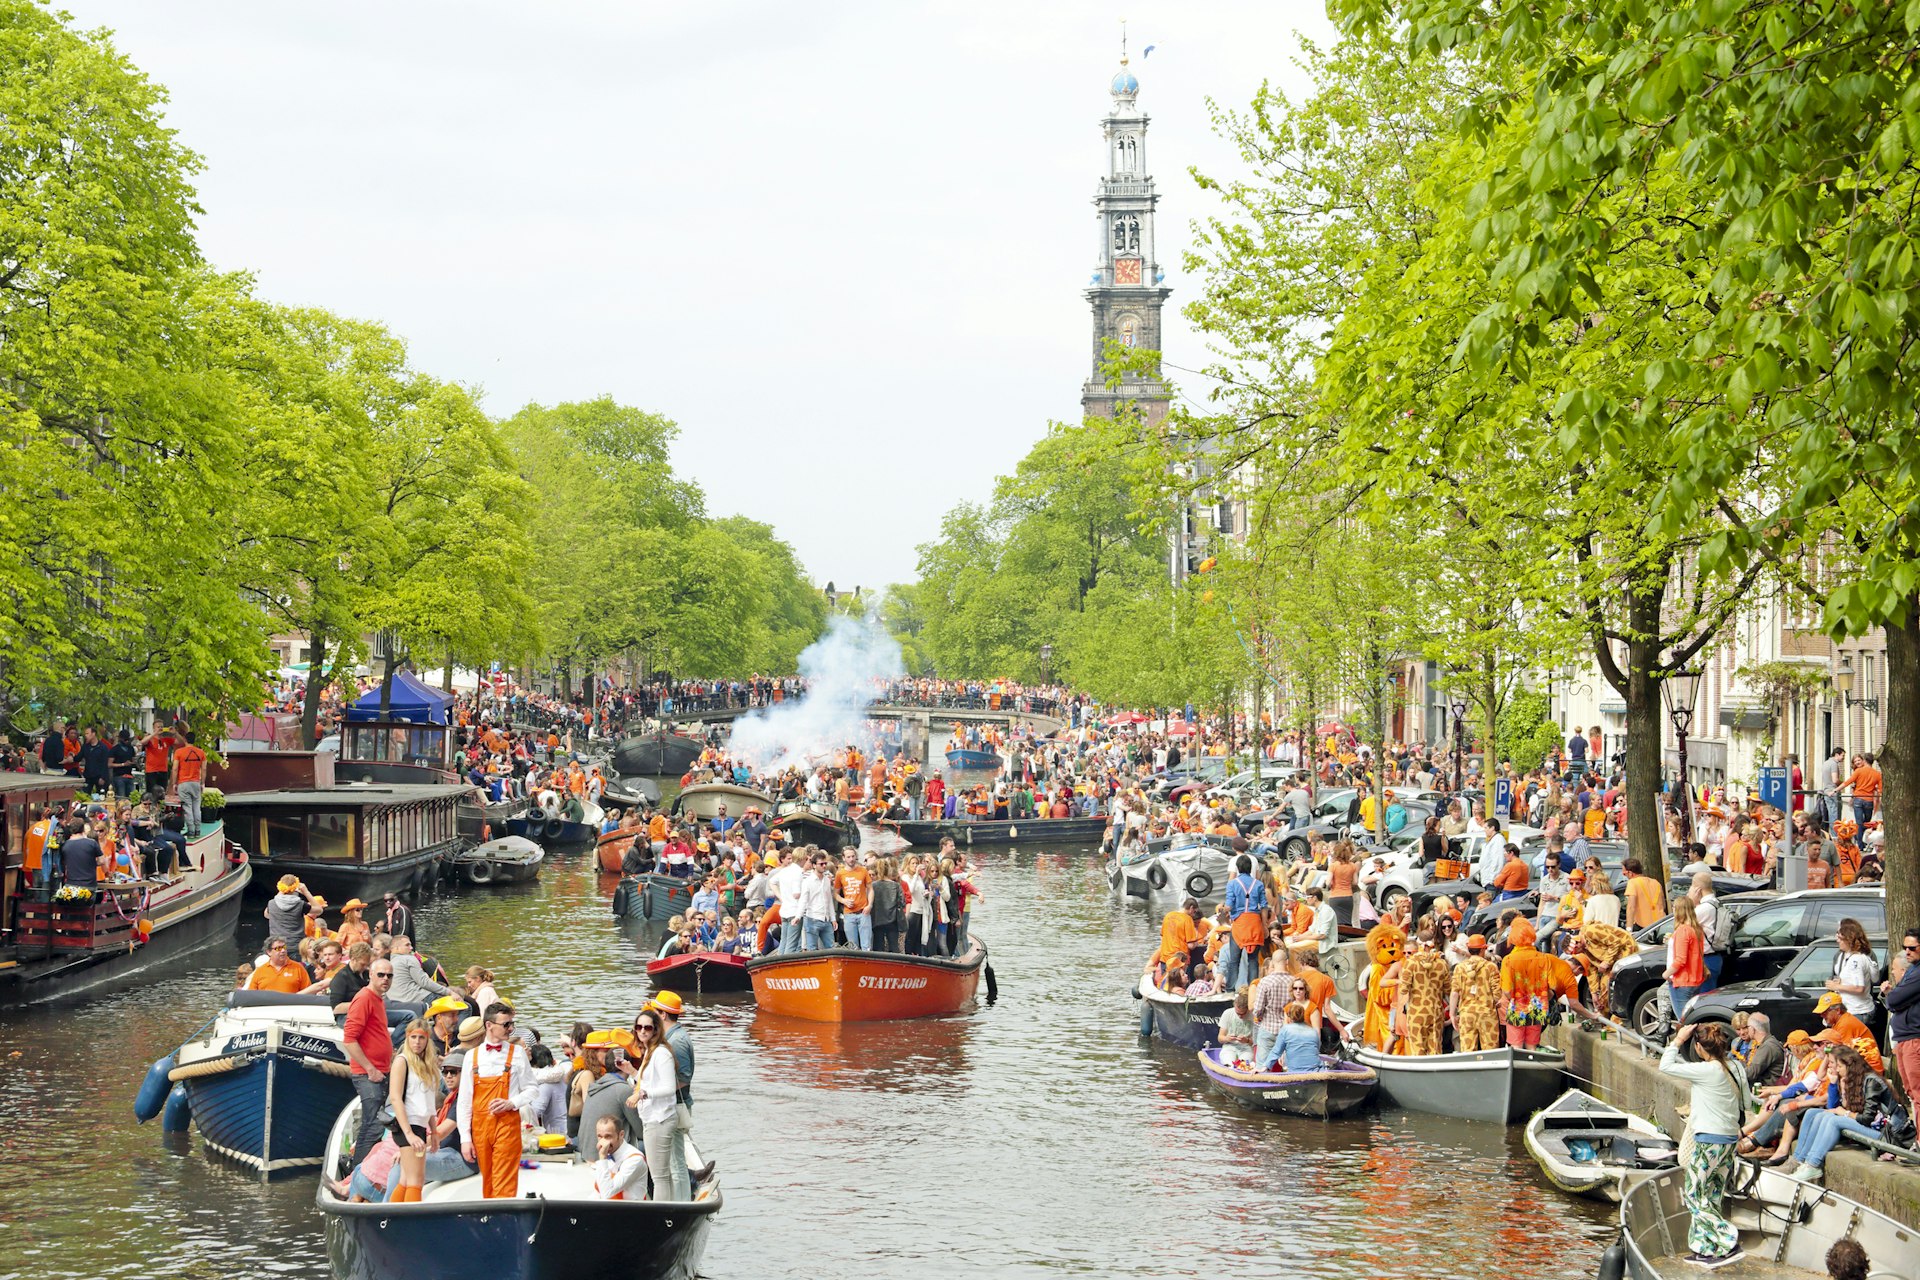 Amsterdam canals full of boats with people dressed in orange to celebrate King's Day